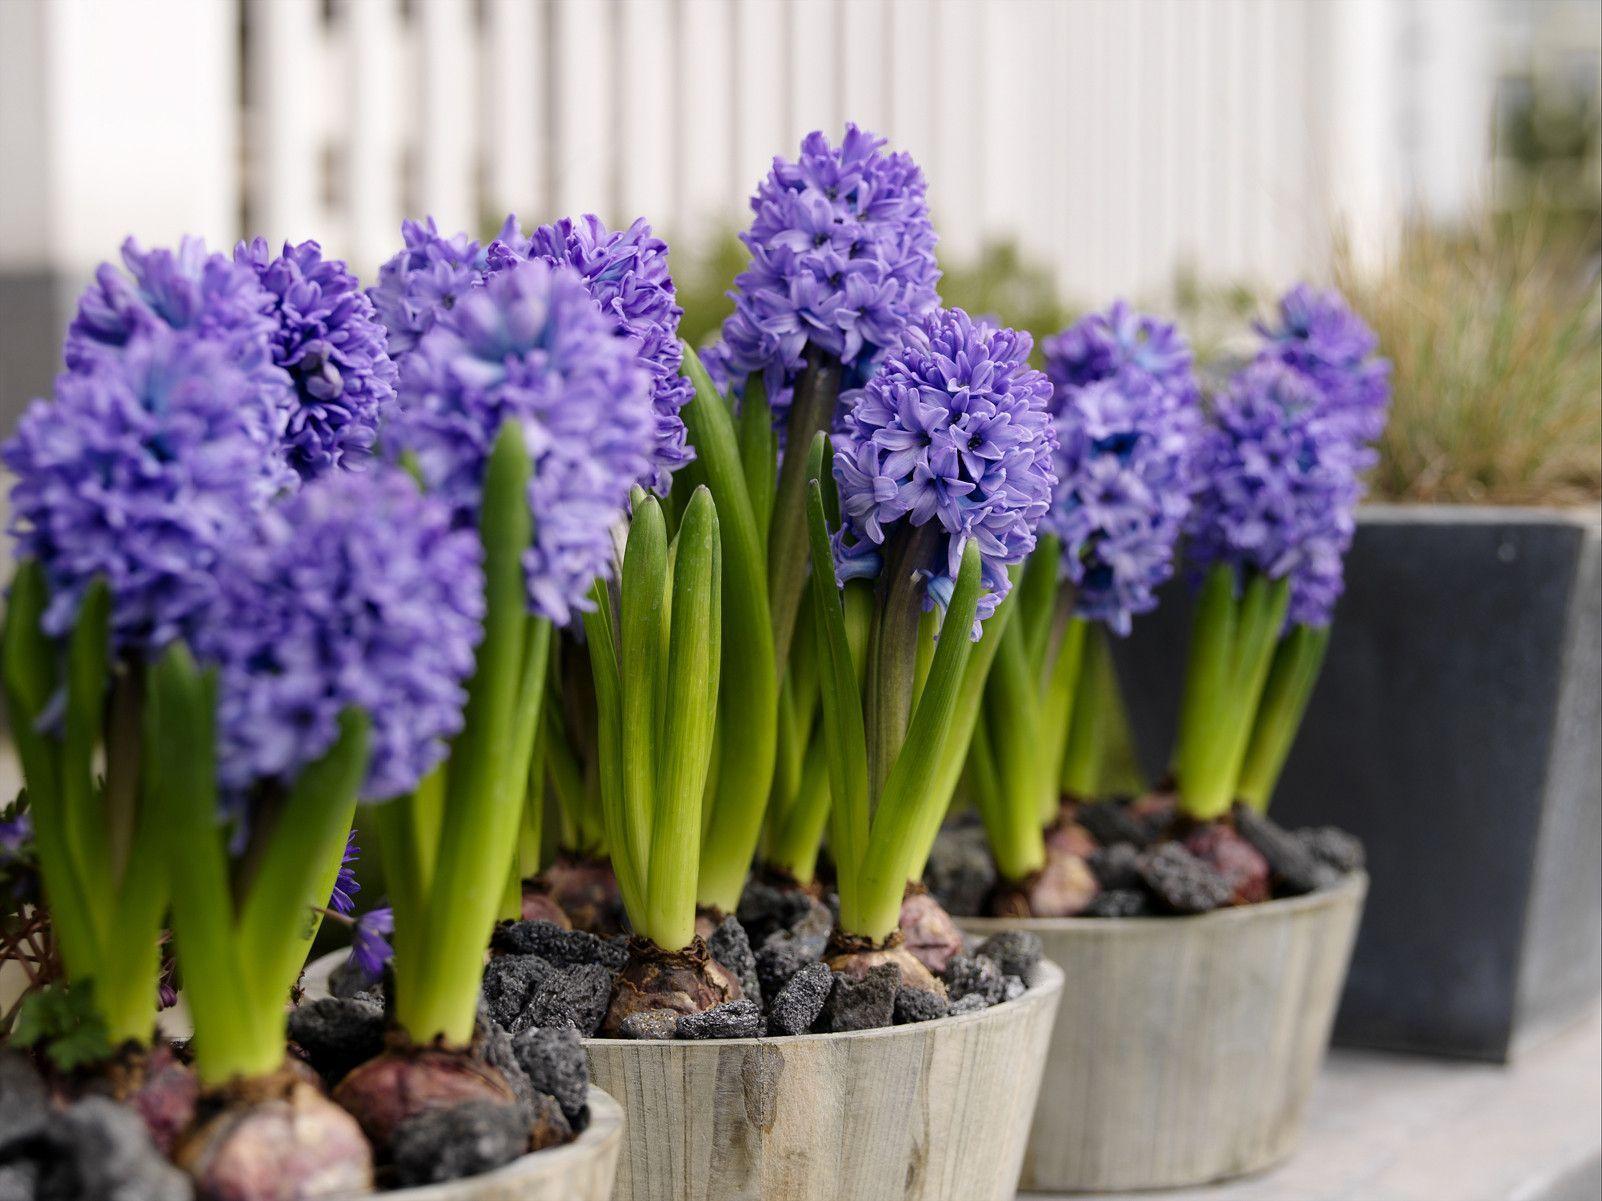 Hyacinth flowers at home wallpaper and image